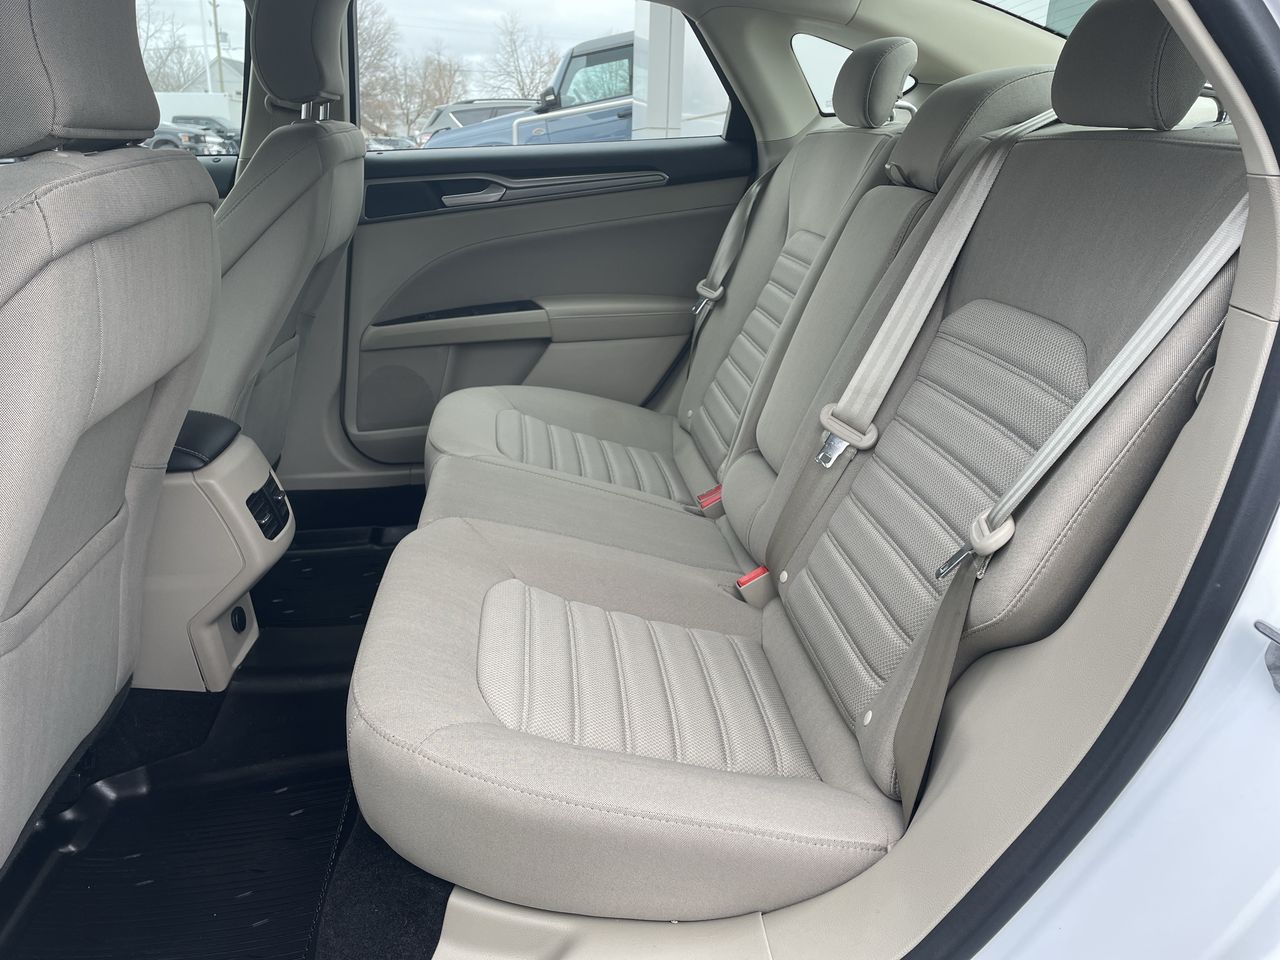 2018 Ford Fusion - P21087 Full Image 22